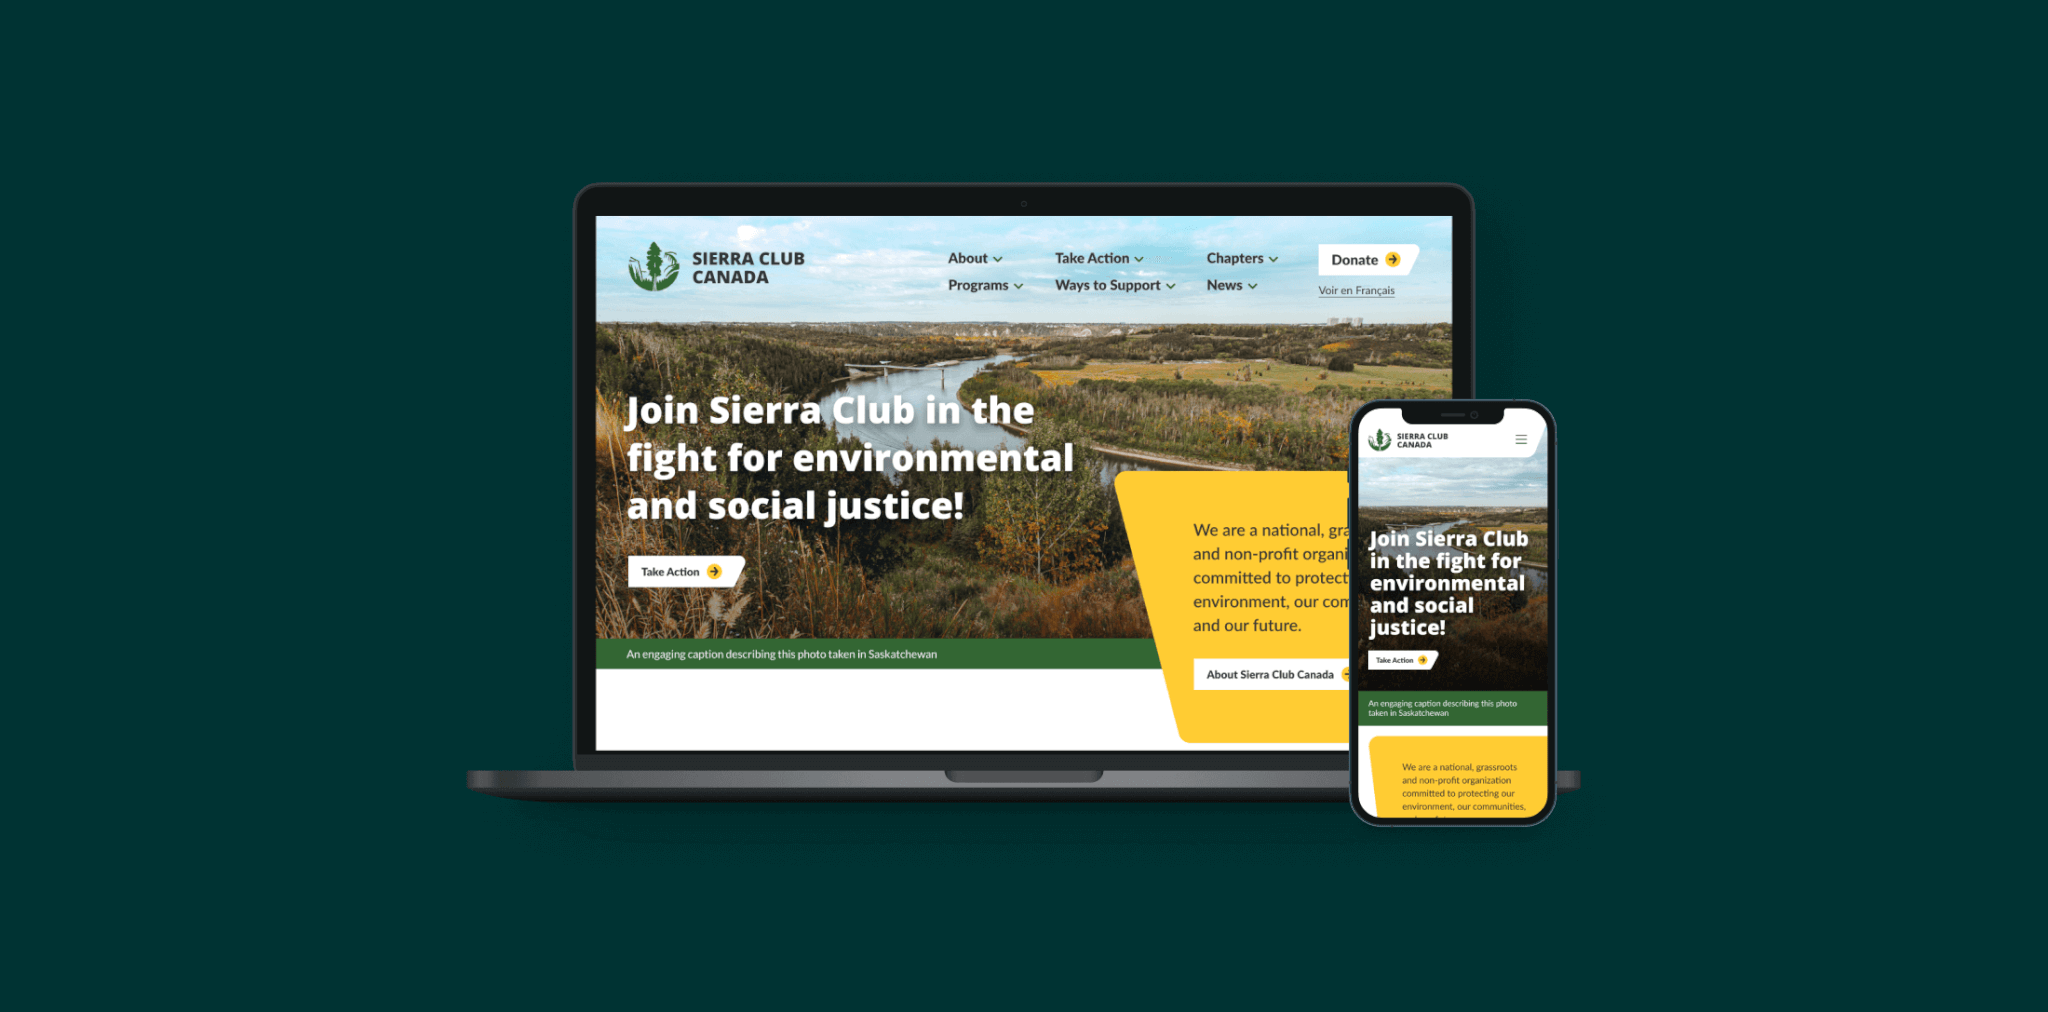 A laptop and phone display the homescreen of Sierra Club Canada